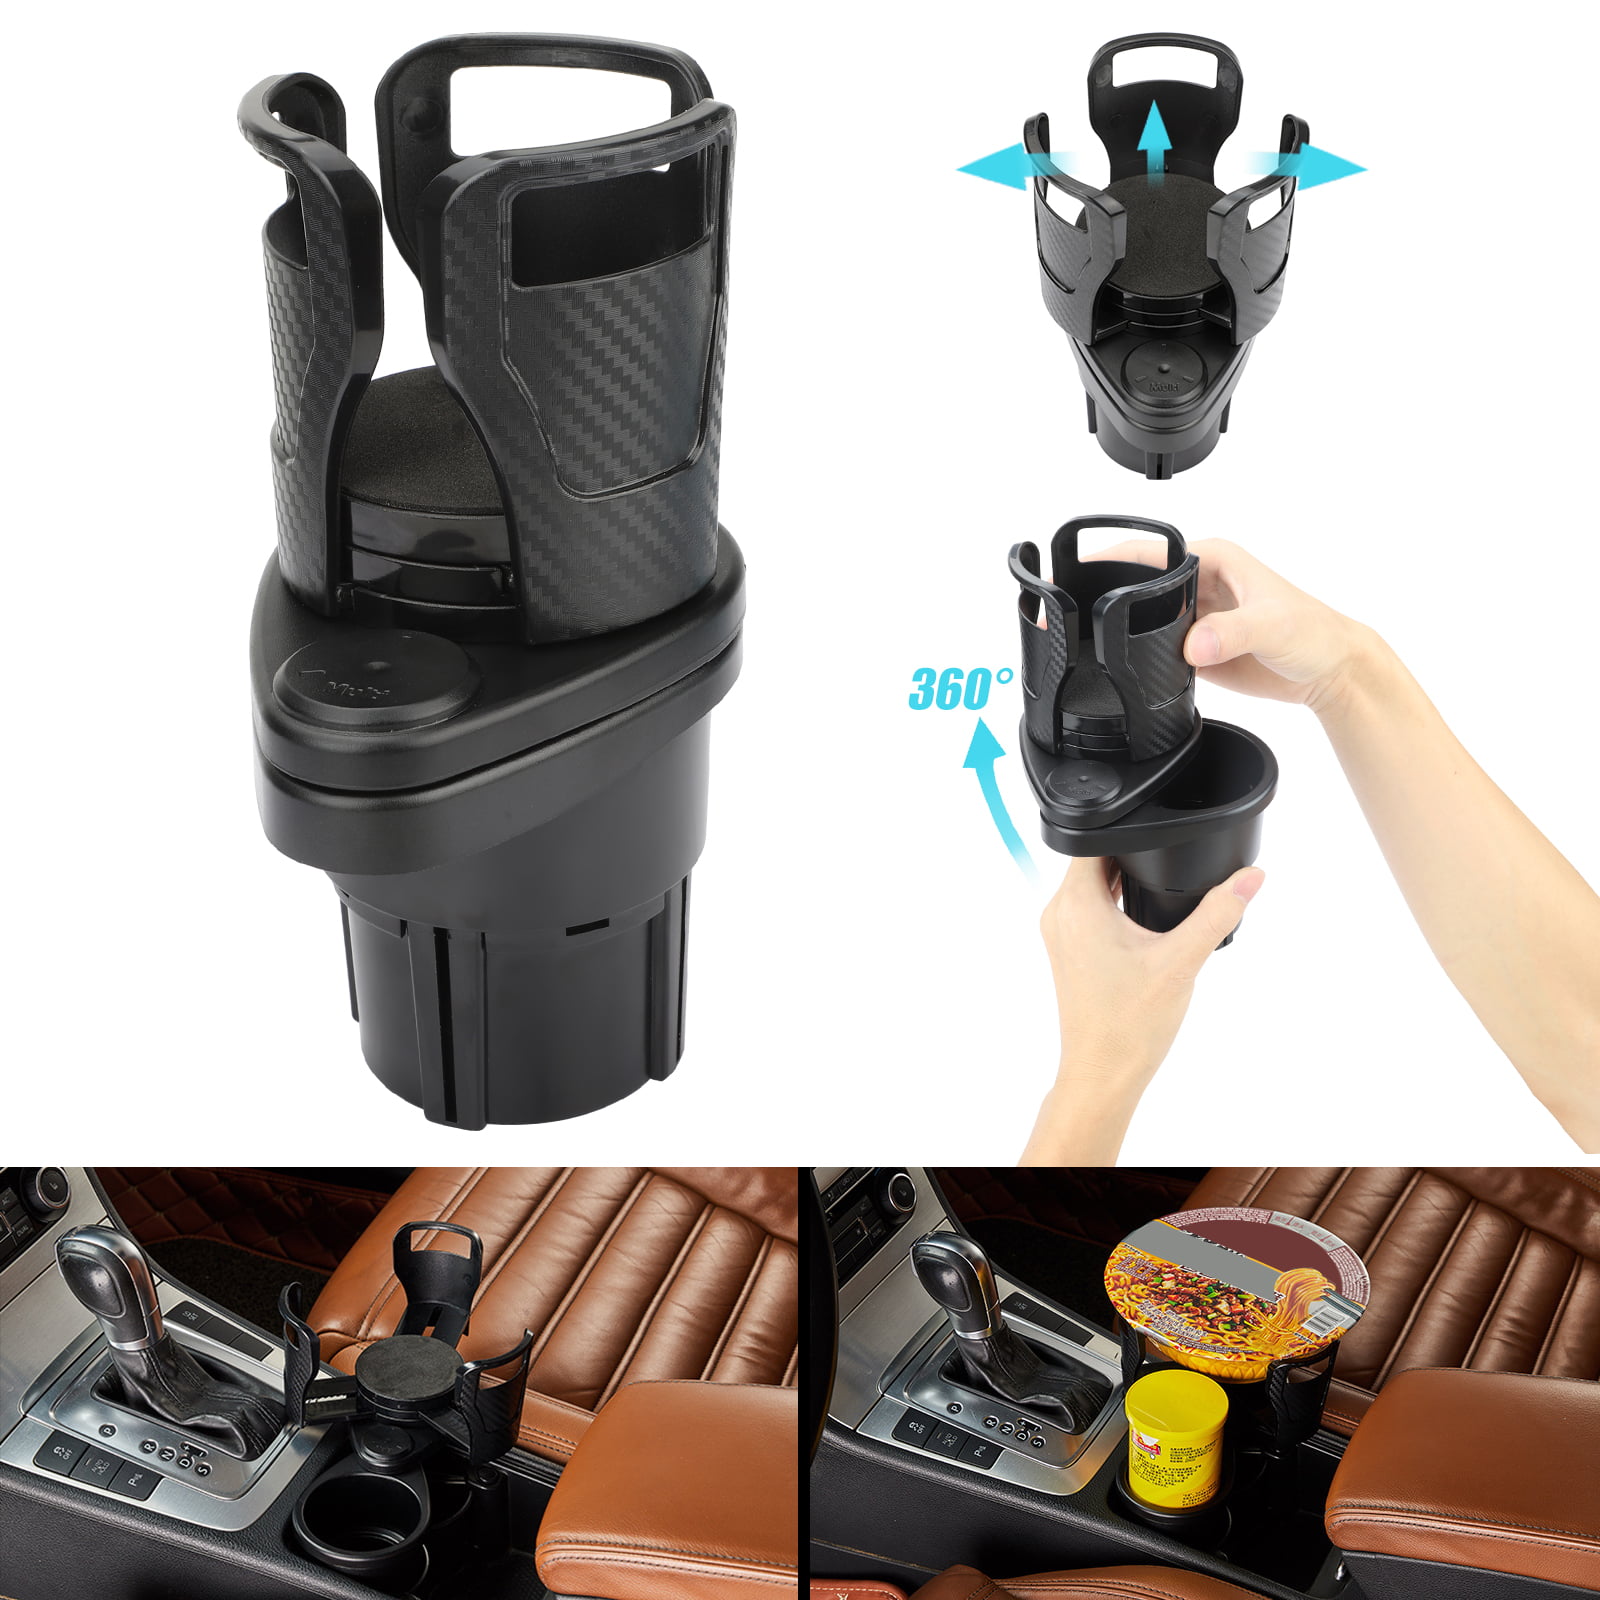 Multifunctional Bottle Holder Extender for Coffee & Drinks Or Movable Detachable Base 2 in 1 Cup Adapter Organizer Stand with an Expandable Bracket for A Snug Fit lebogner Car Cup Holder Expander